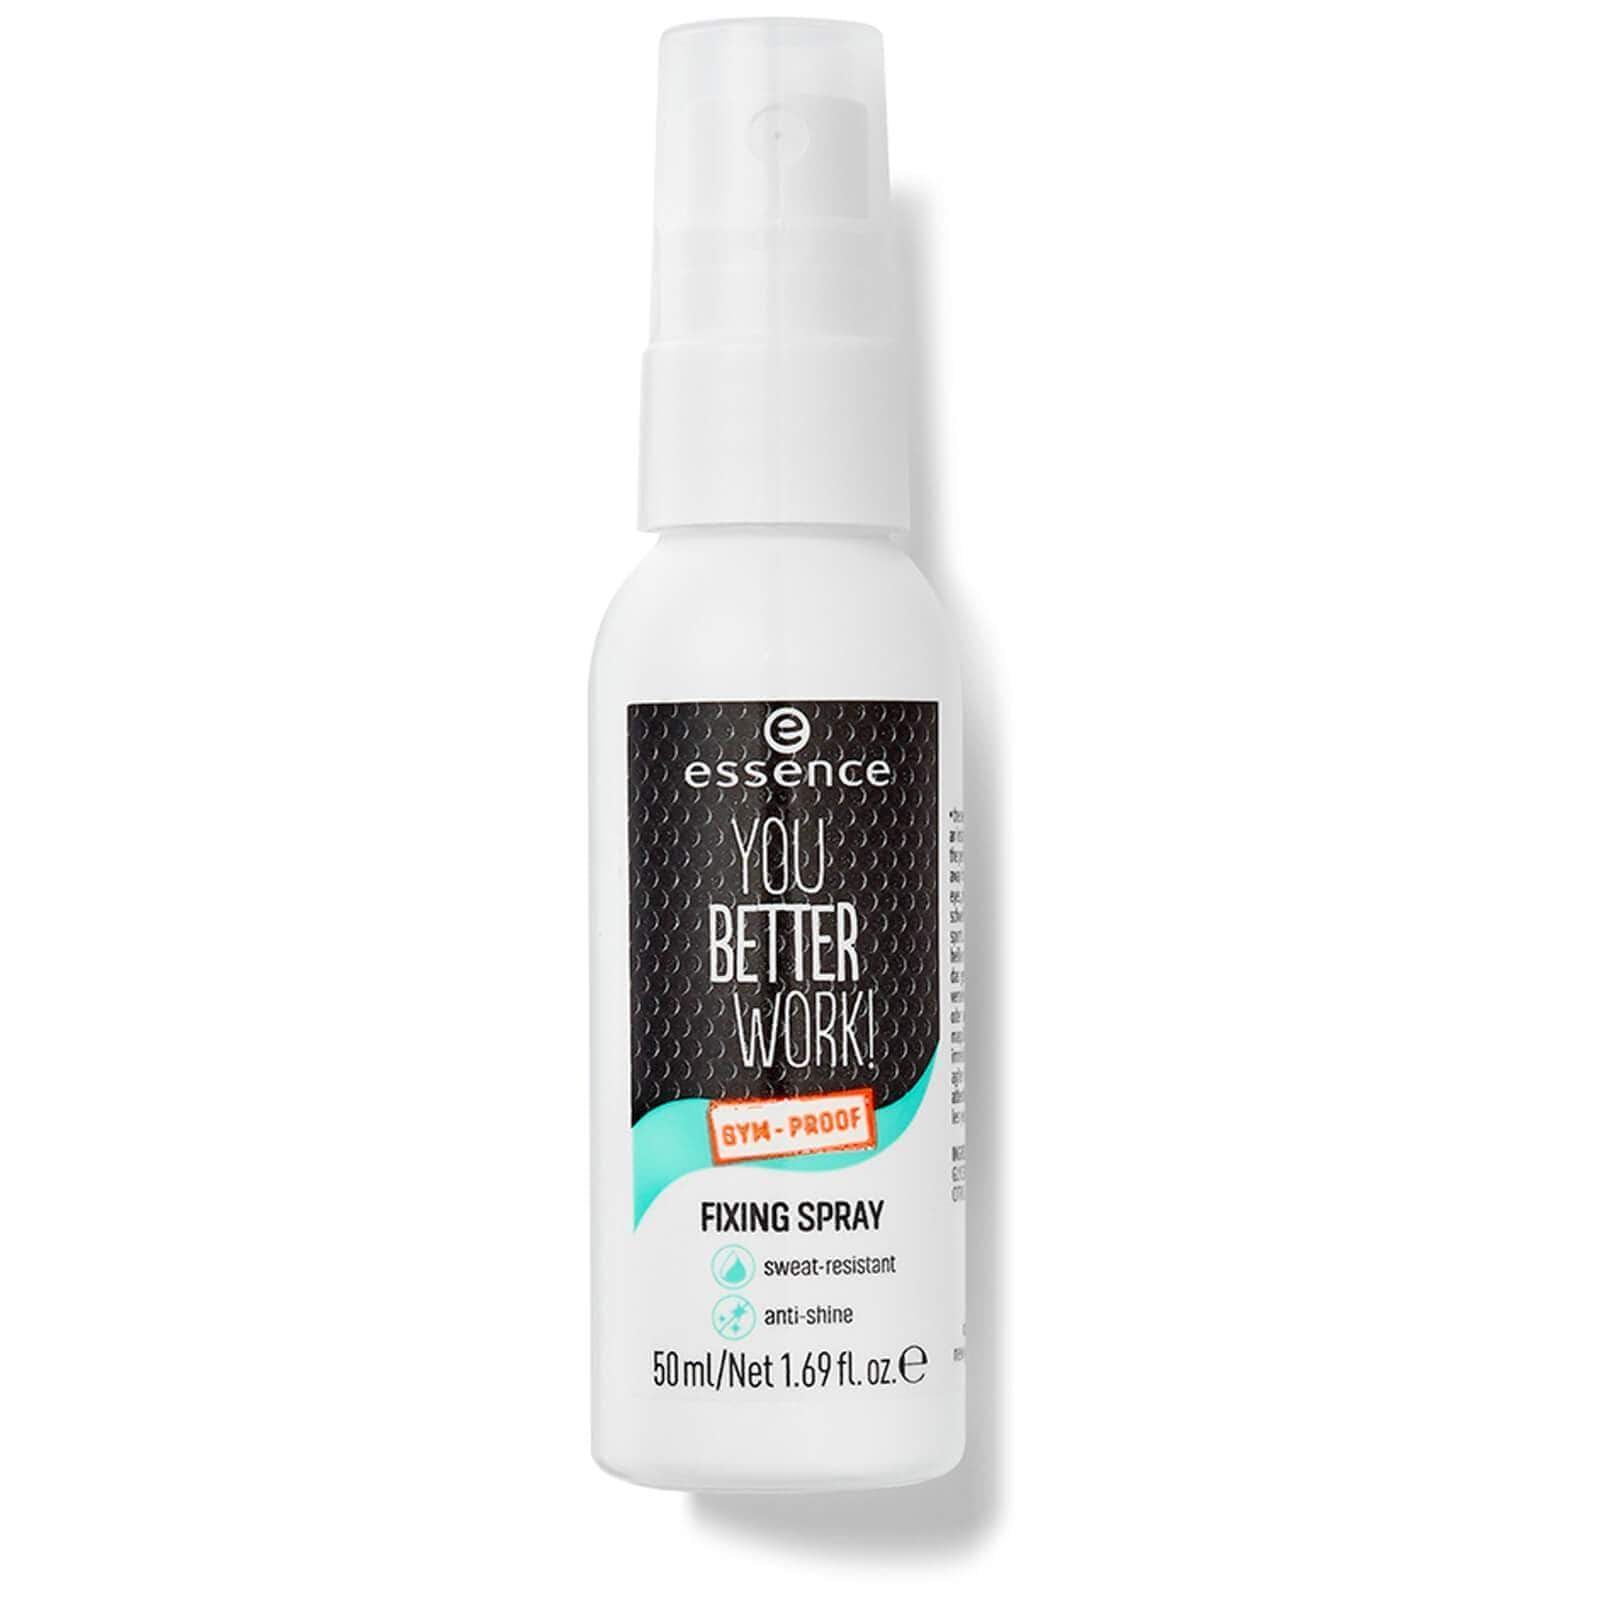 ESSENCE YOU BETTER WORK! GYM-PROOF FIXING SPRAY Minoustore